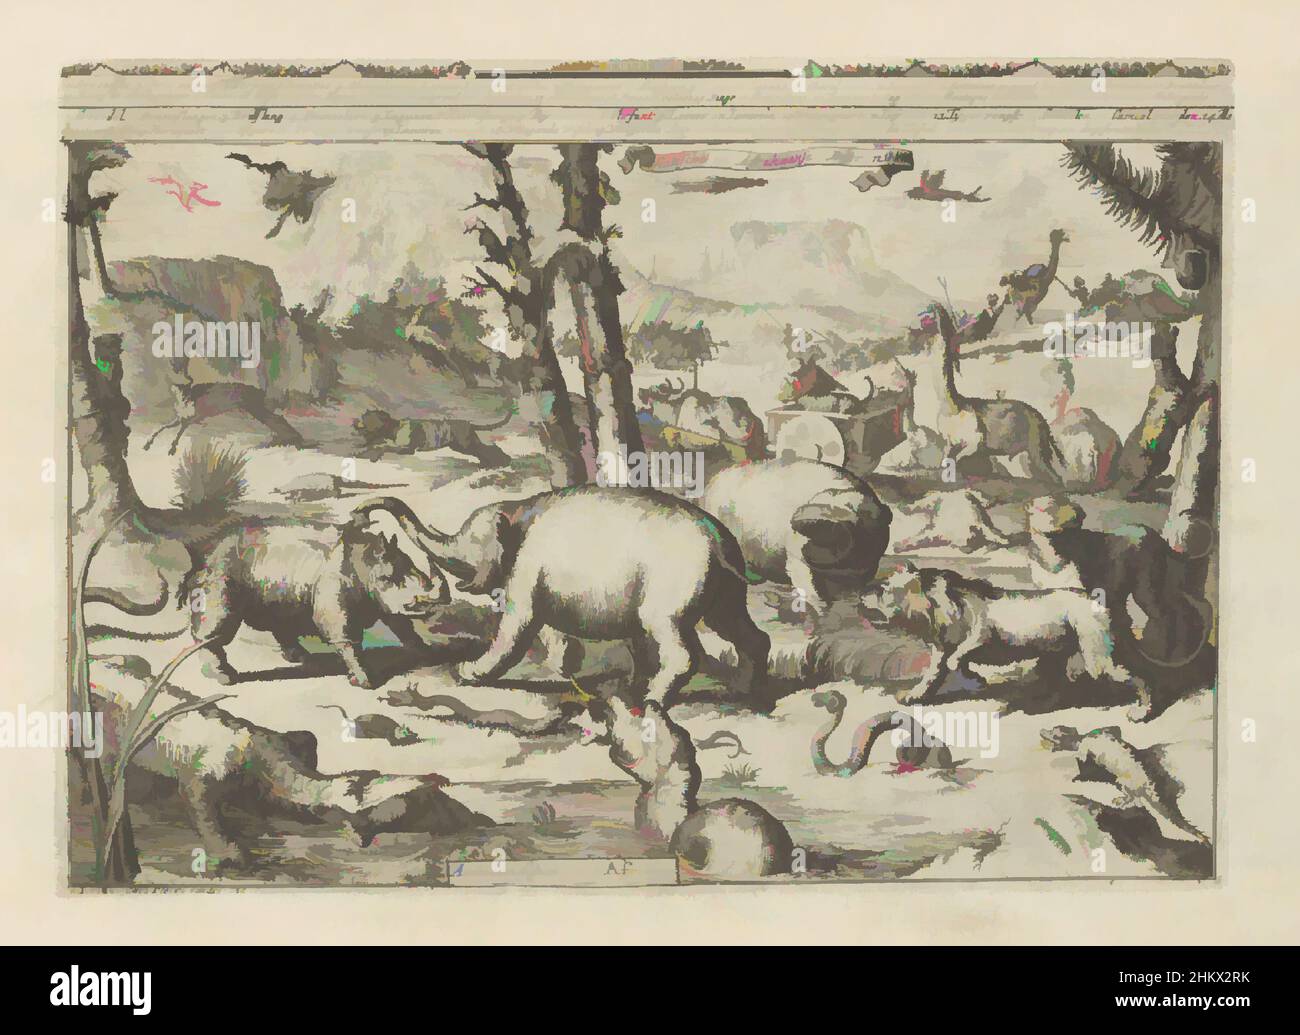 Art inspired by Asian and African animals, Asian and African animals, Animaux d'Asie et d'Afrique, Les Indes Orientales et Occidentales et autres lieux (series title), Landscape with Asian and African animals. In the foreground left, a man is being devoured by a crocodile. The large, Classic works modernized by Artotop with a splash of modernity. Shapes, color and value, eye-catching visual impact on art. Emotions through freedom of artworks in a contemporary way. A timeless message pursuing a wildly creative new direction. Artists turning to the digital medium and creating the Artotop NFT Stock Photo